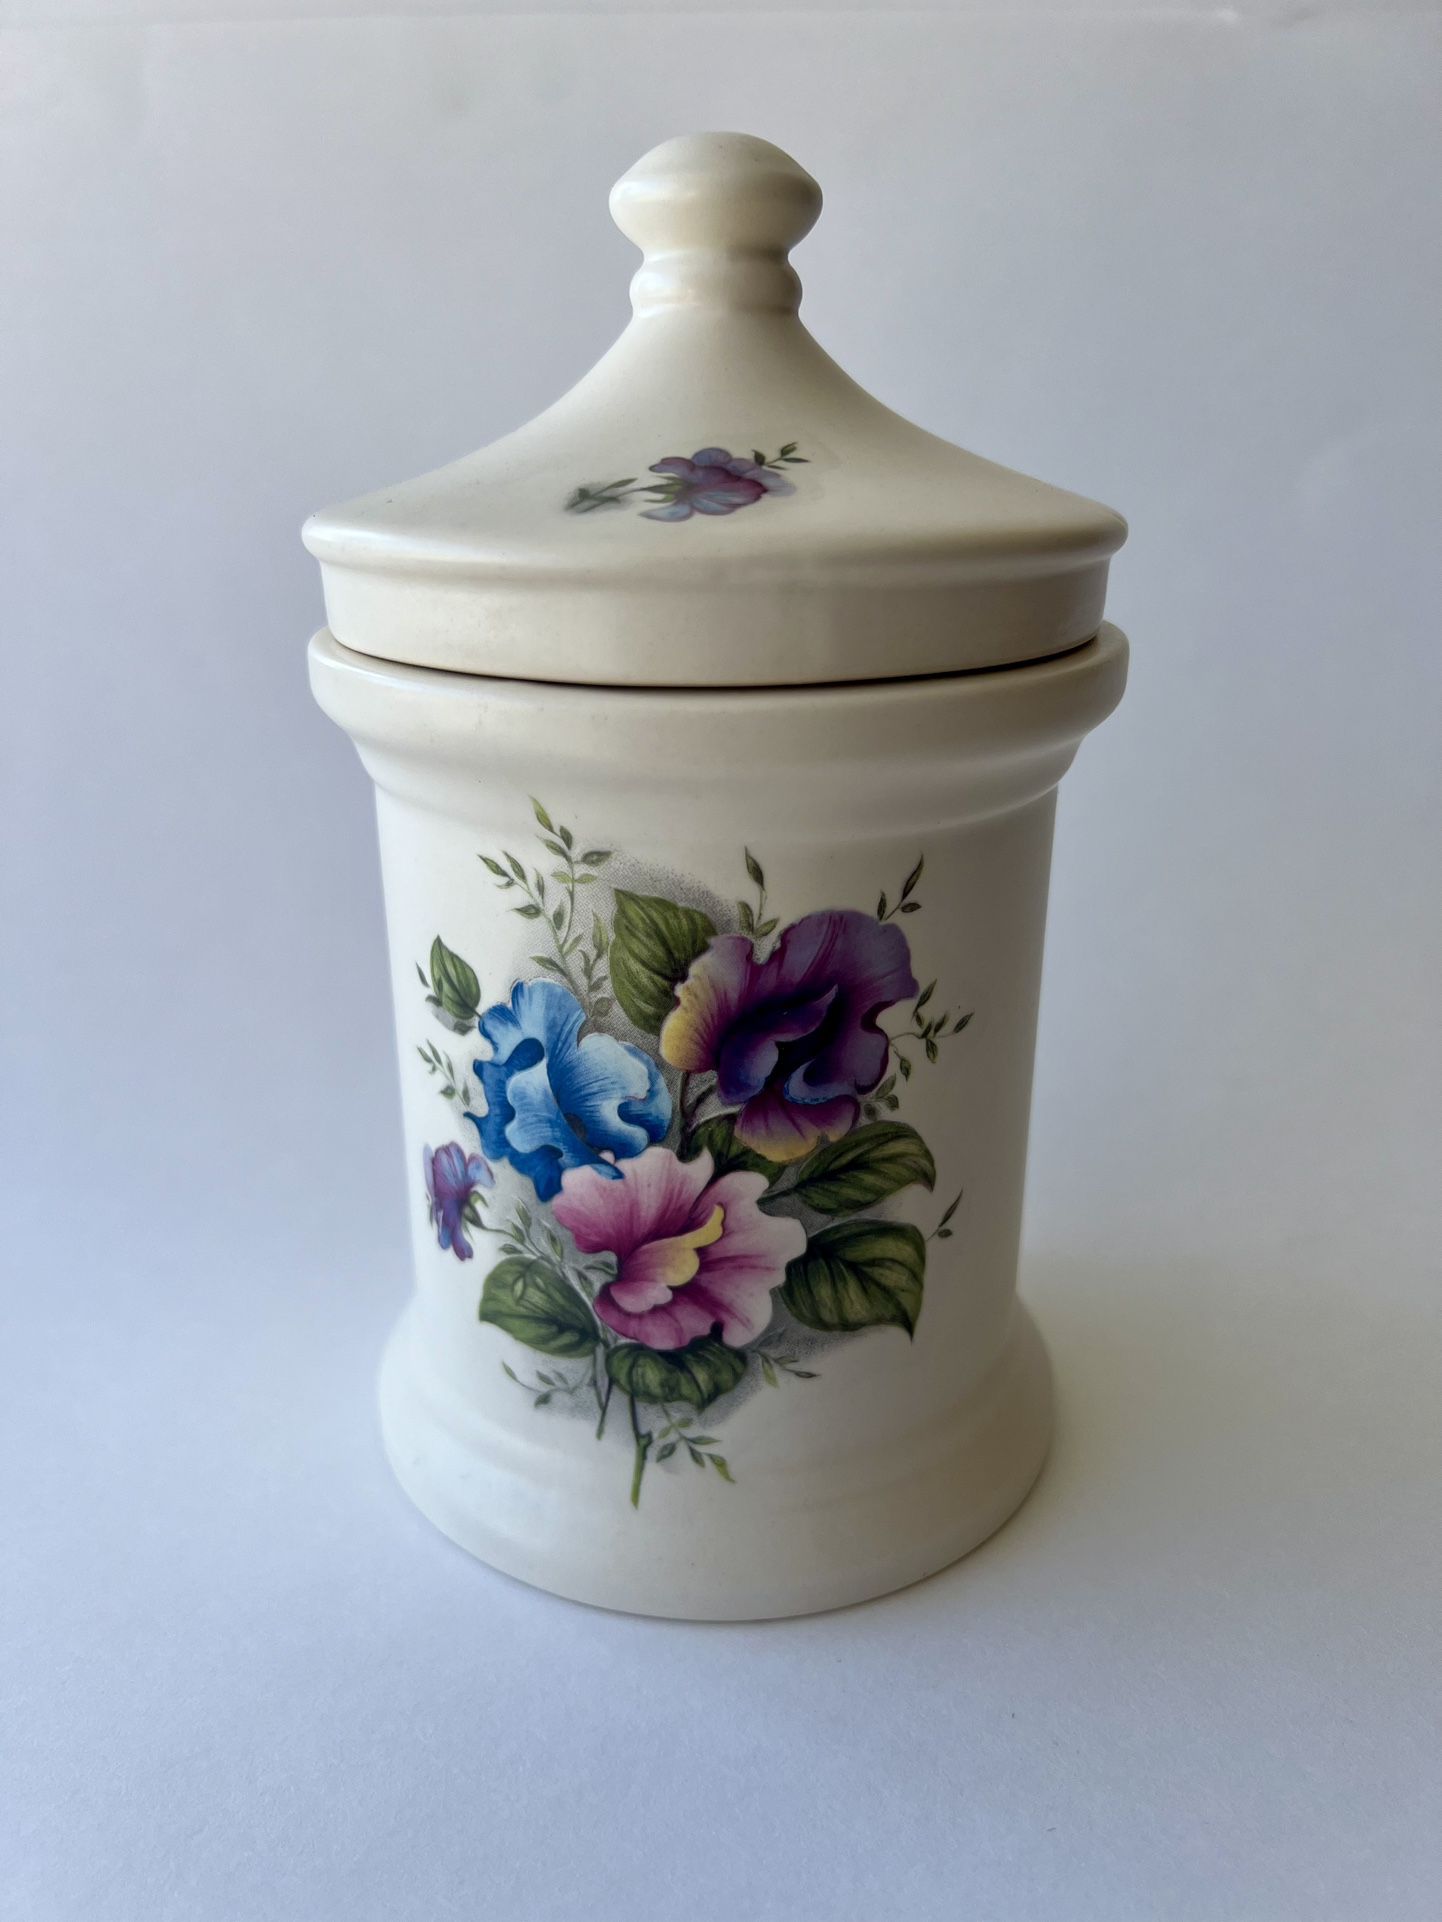 Purbeck Gifts Poole Dorset Ceramic Lidded Canister Made In England